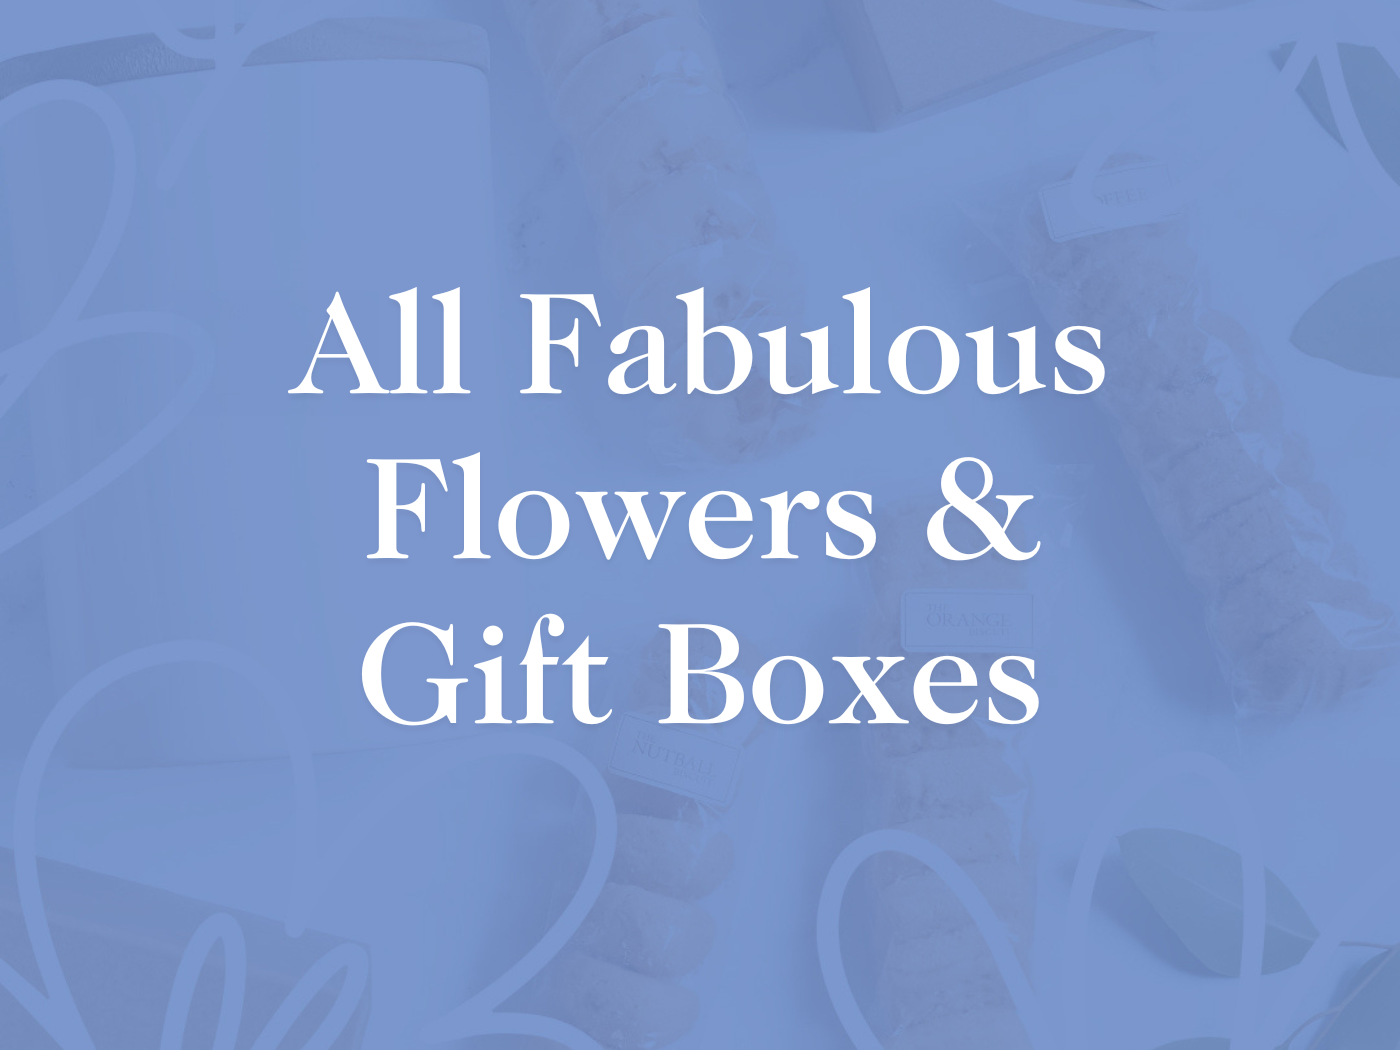 An array of beautifully wrapped gifts and flowers in a blue background - Fabulous Flowers and Gifts, All Fabulous Flowers and Gift Boxes.